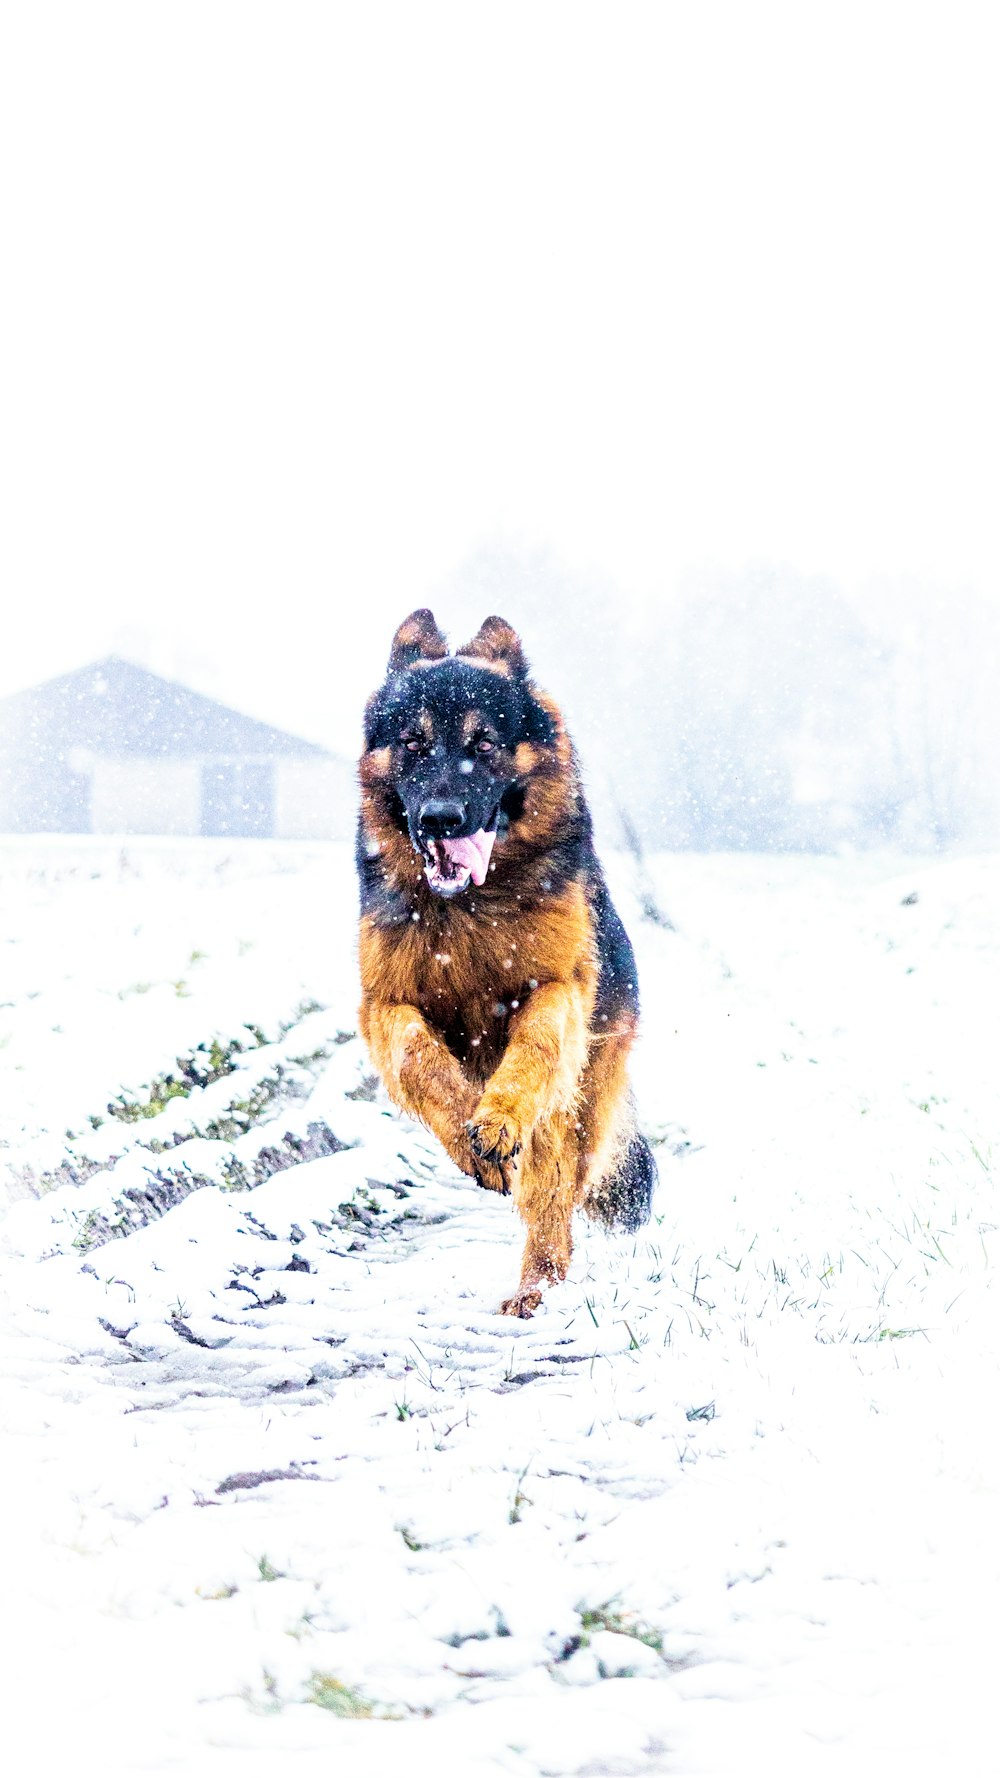 a dog running through a snow covered field